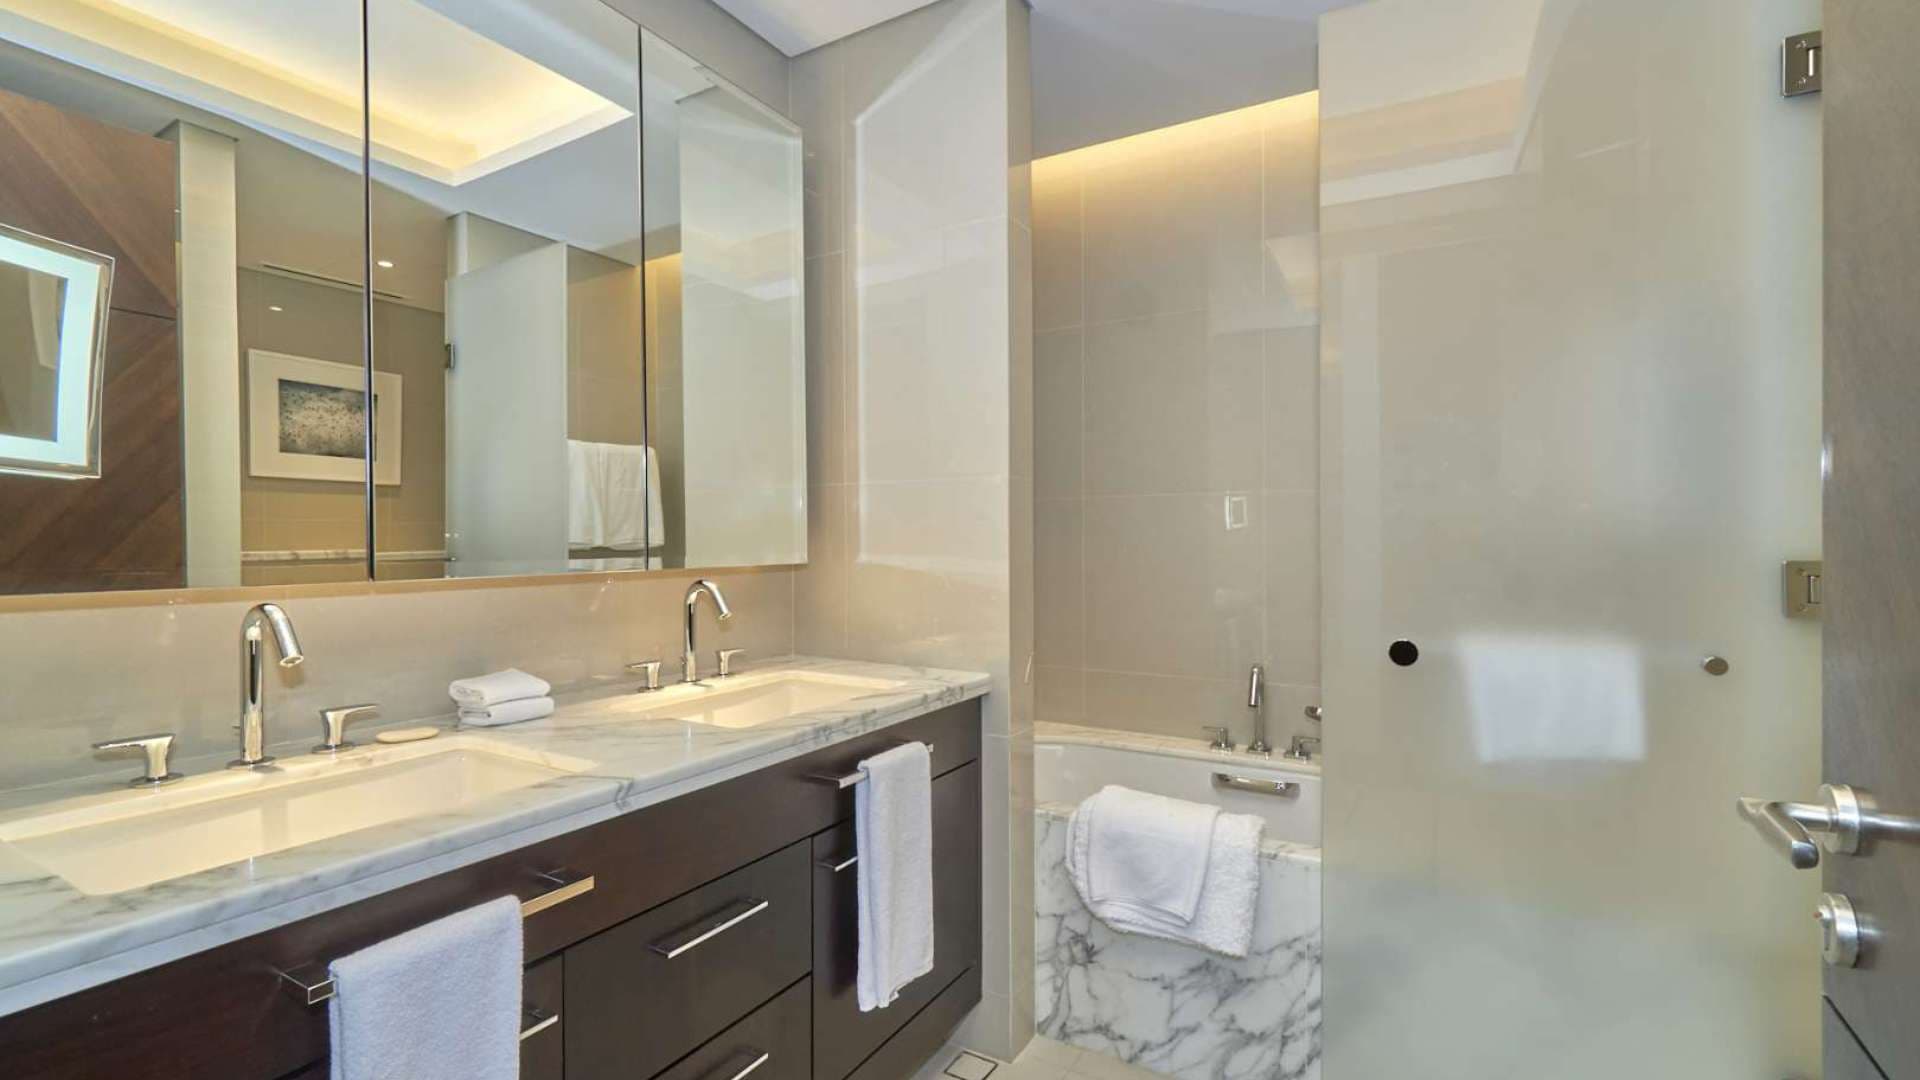 2 Bedroom Serviced Residences For Rent Address Residences Sky View Lp10911 2a77fdafb3f66800.jpg